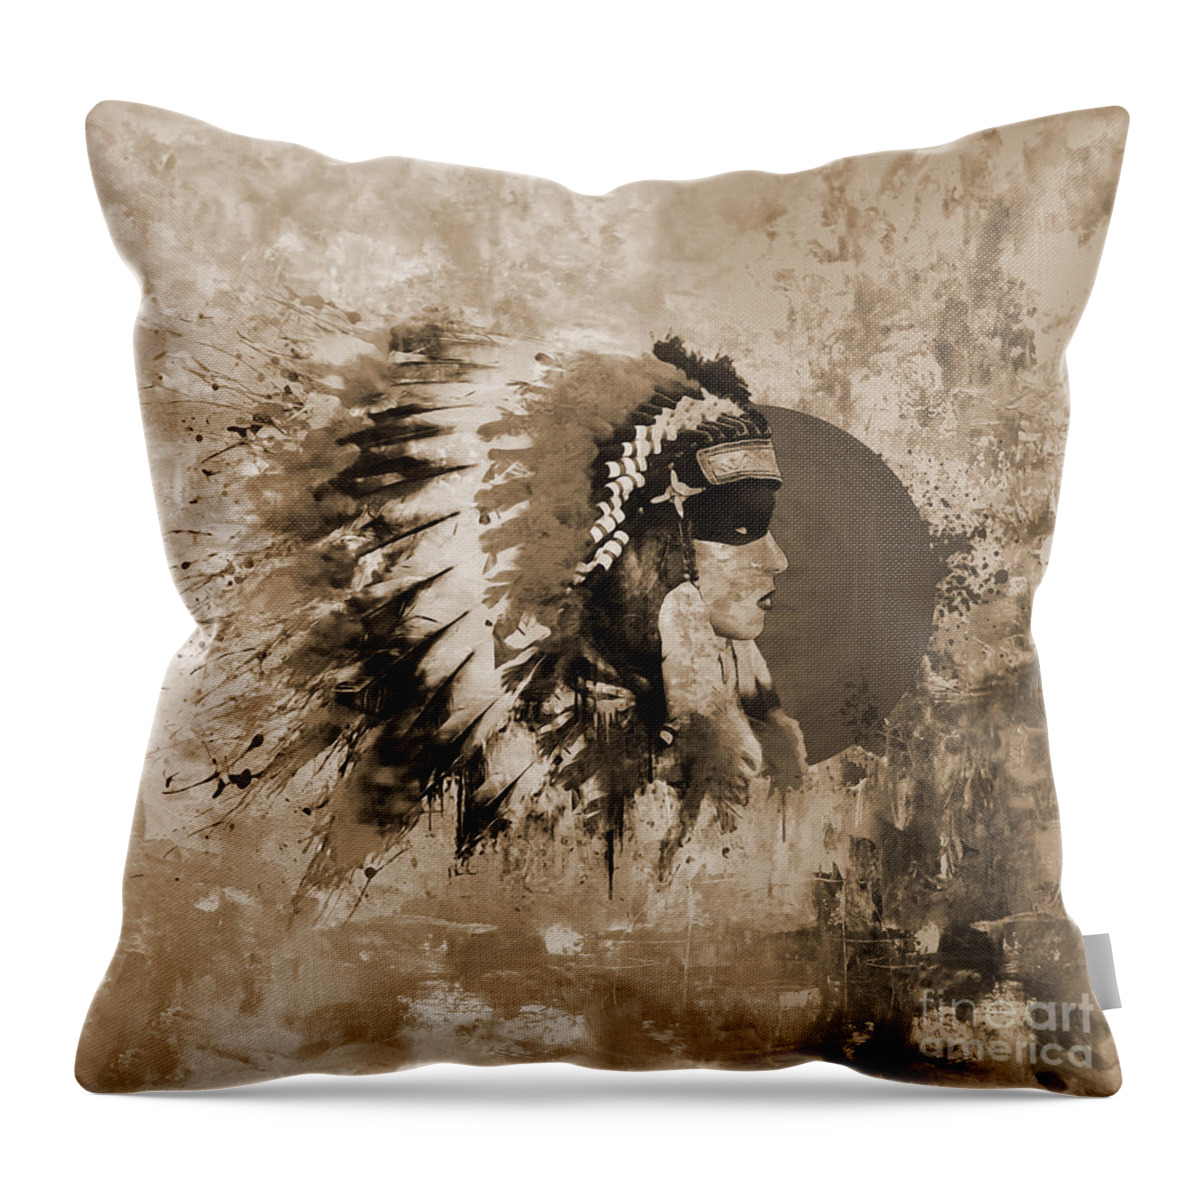 Native American Throw Pillow featuring the painting Native American Art uujq by Gull G